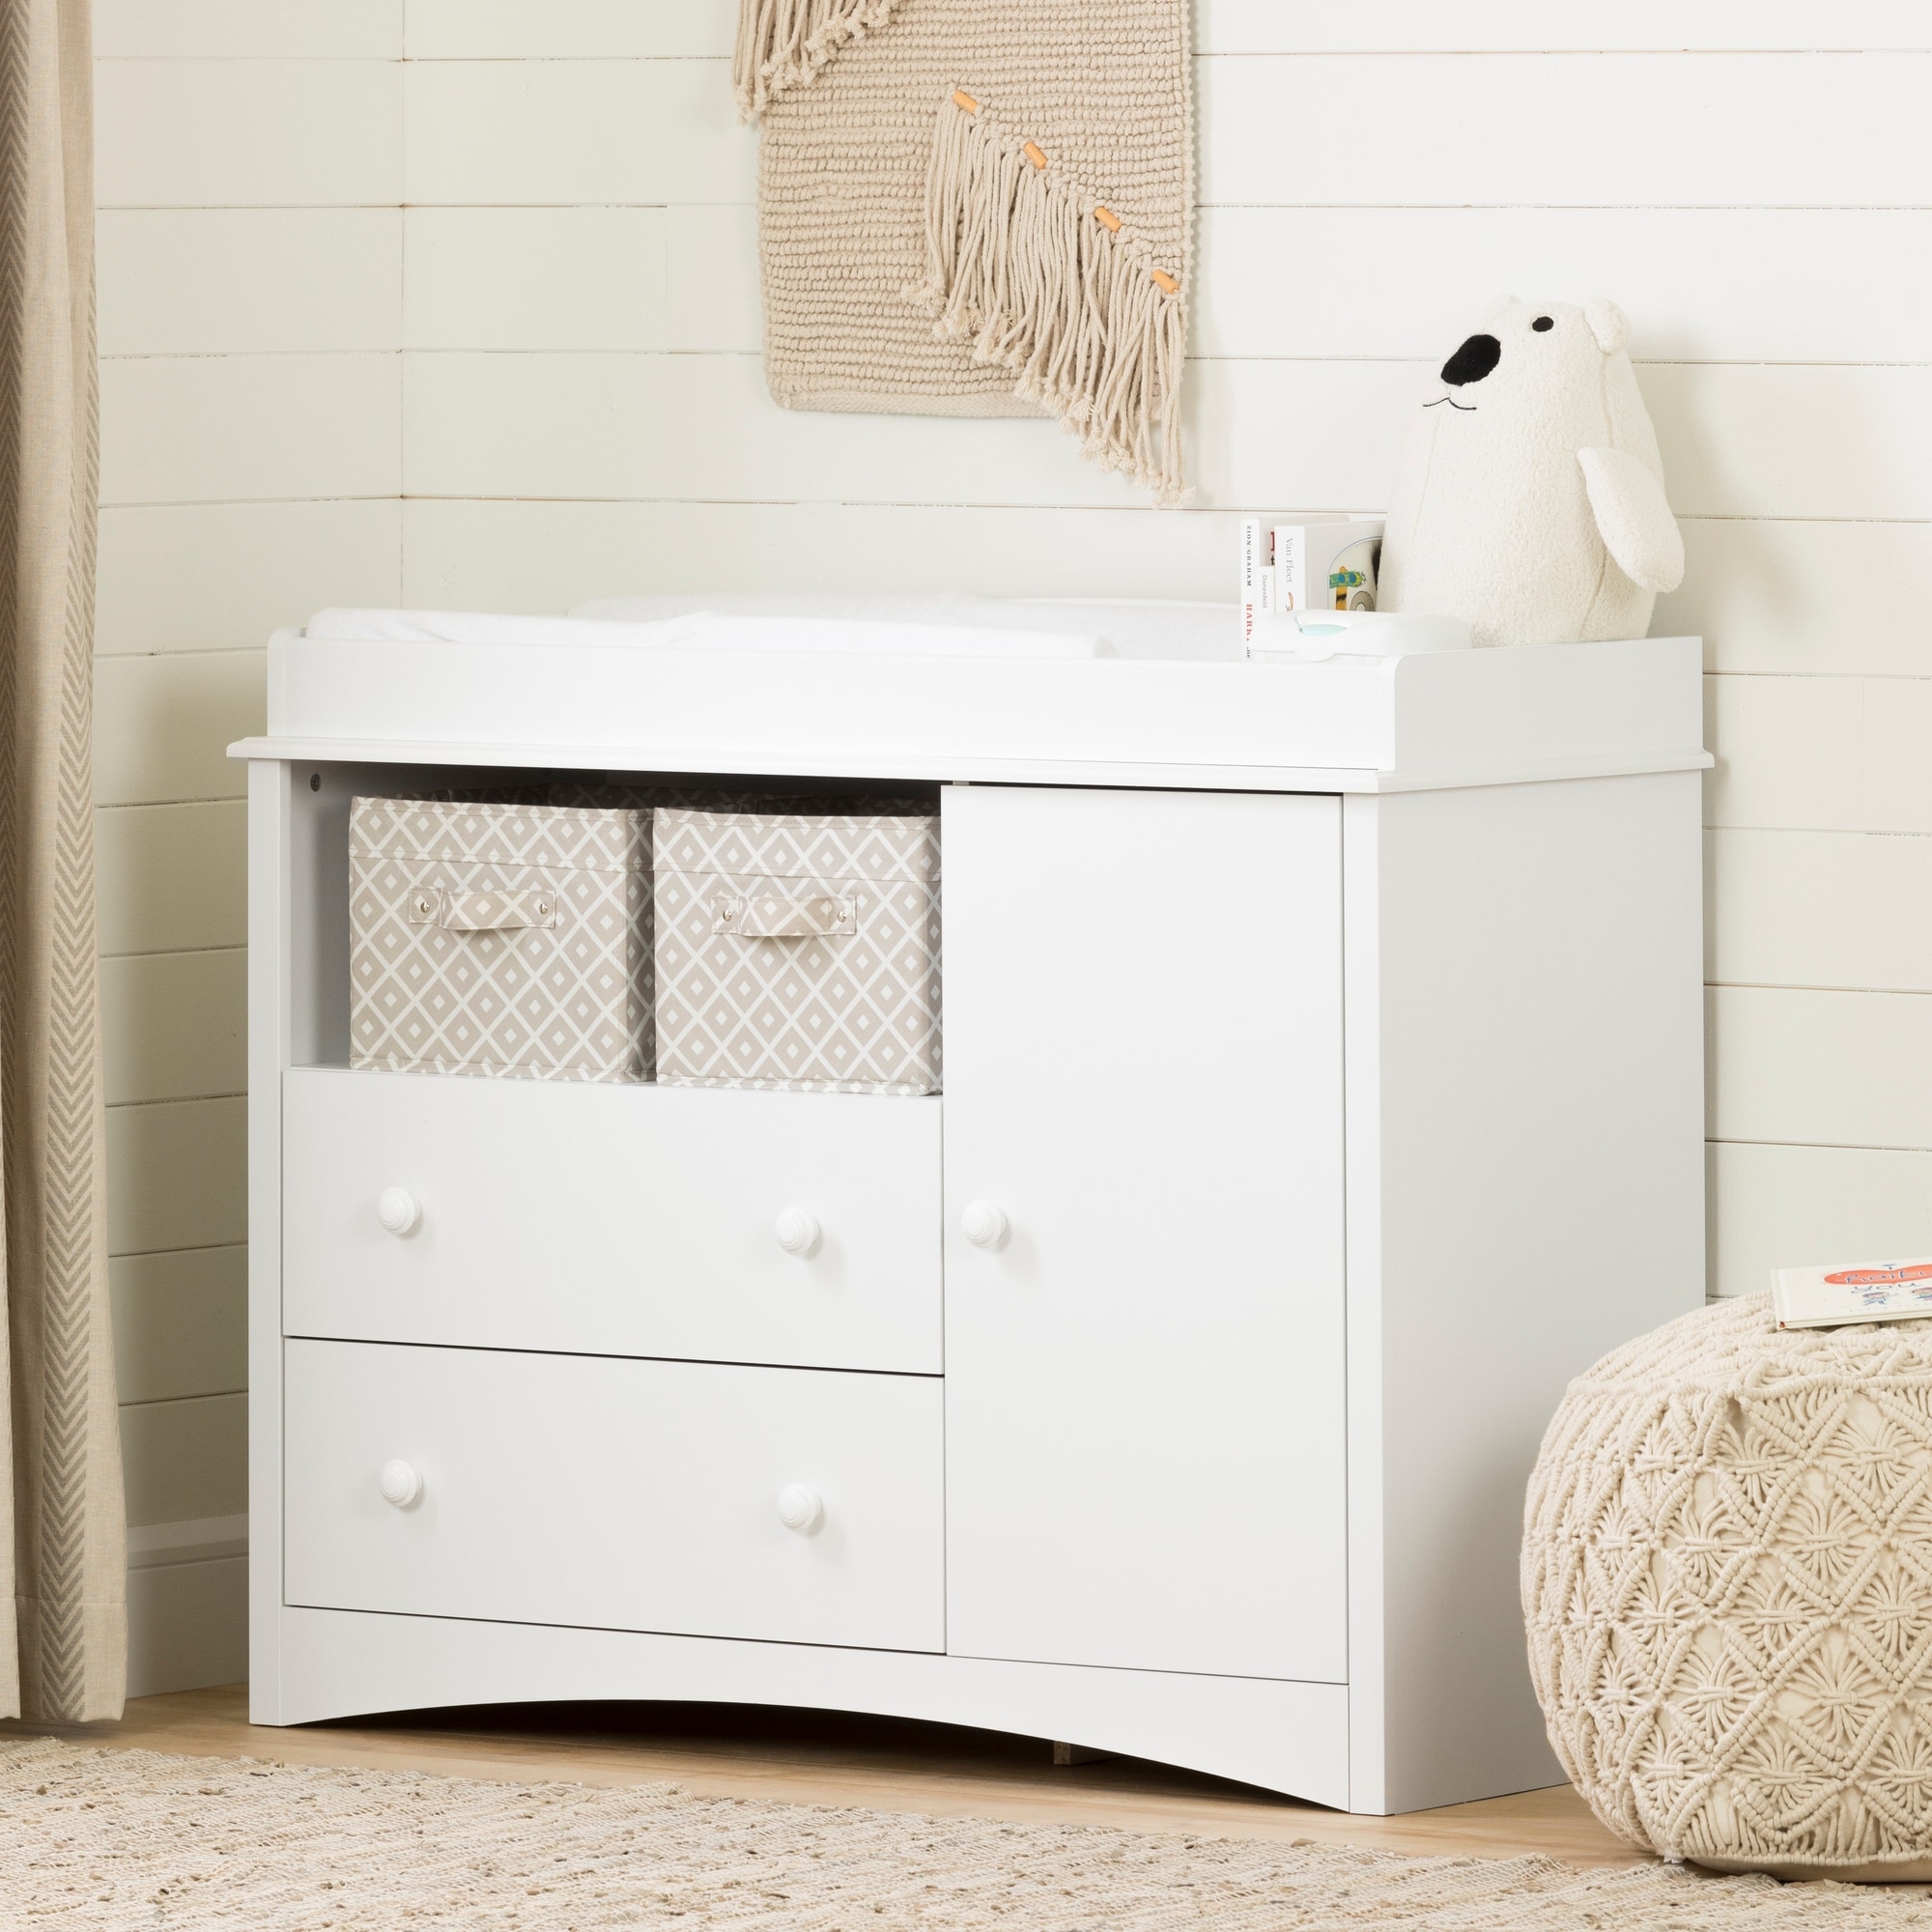 Peek-a-boo Collection Changing Table 